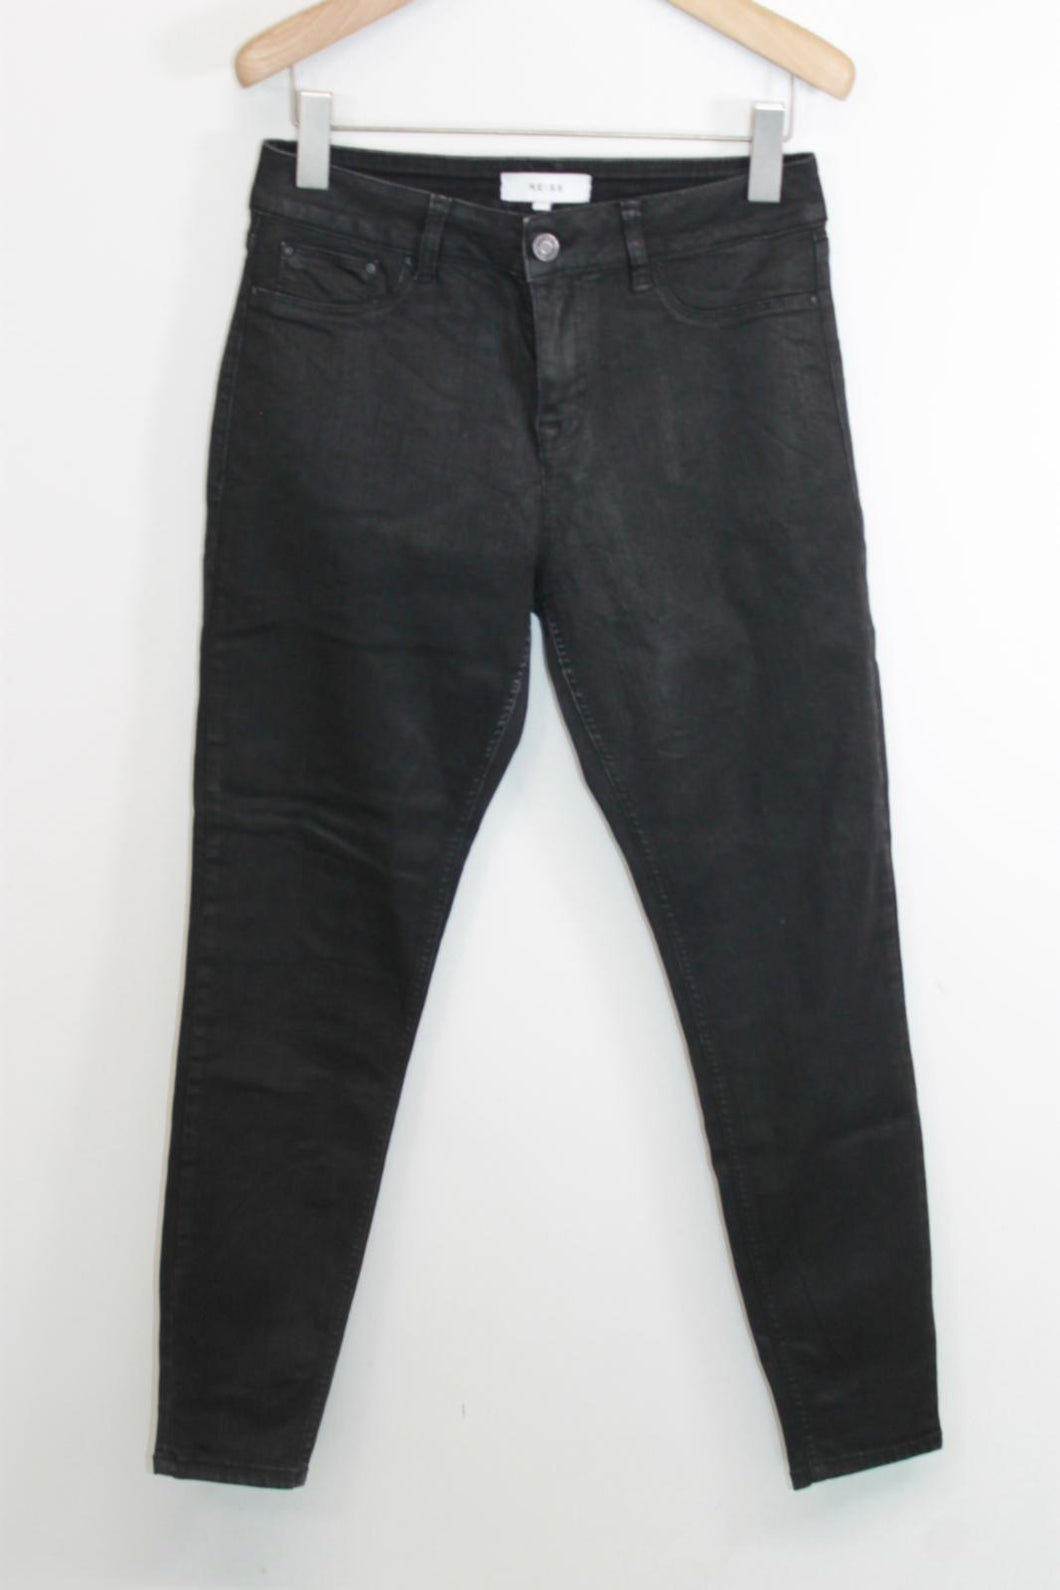 REISS Ladies Black Cotton Denim Lux Coated High Rise Tapered Jeans Size 30